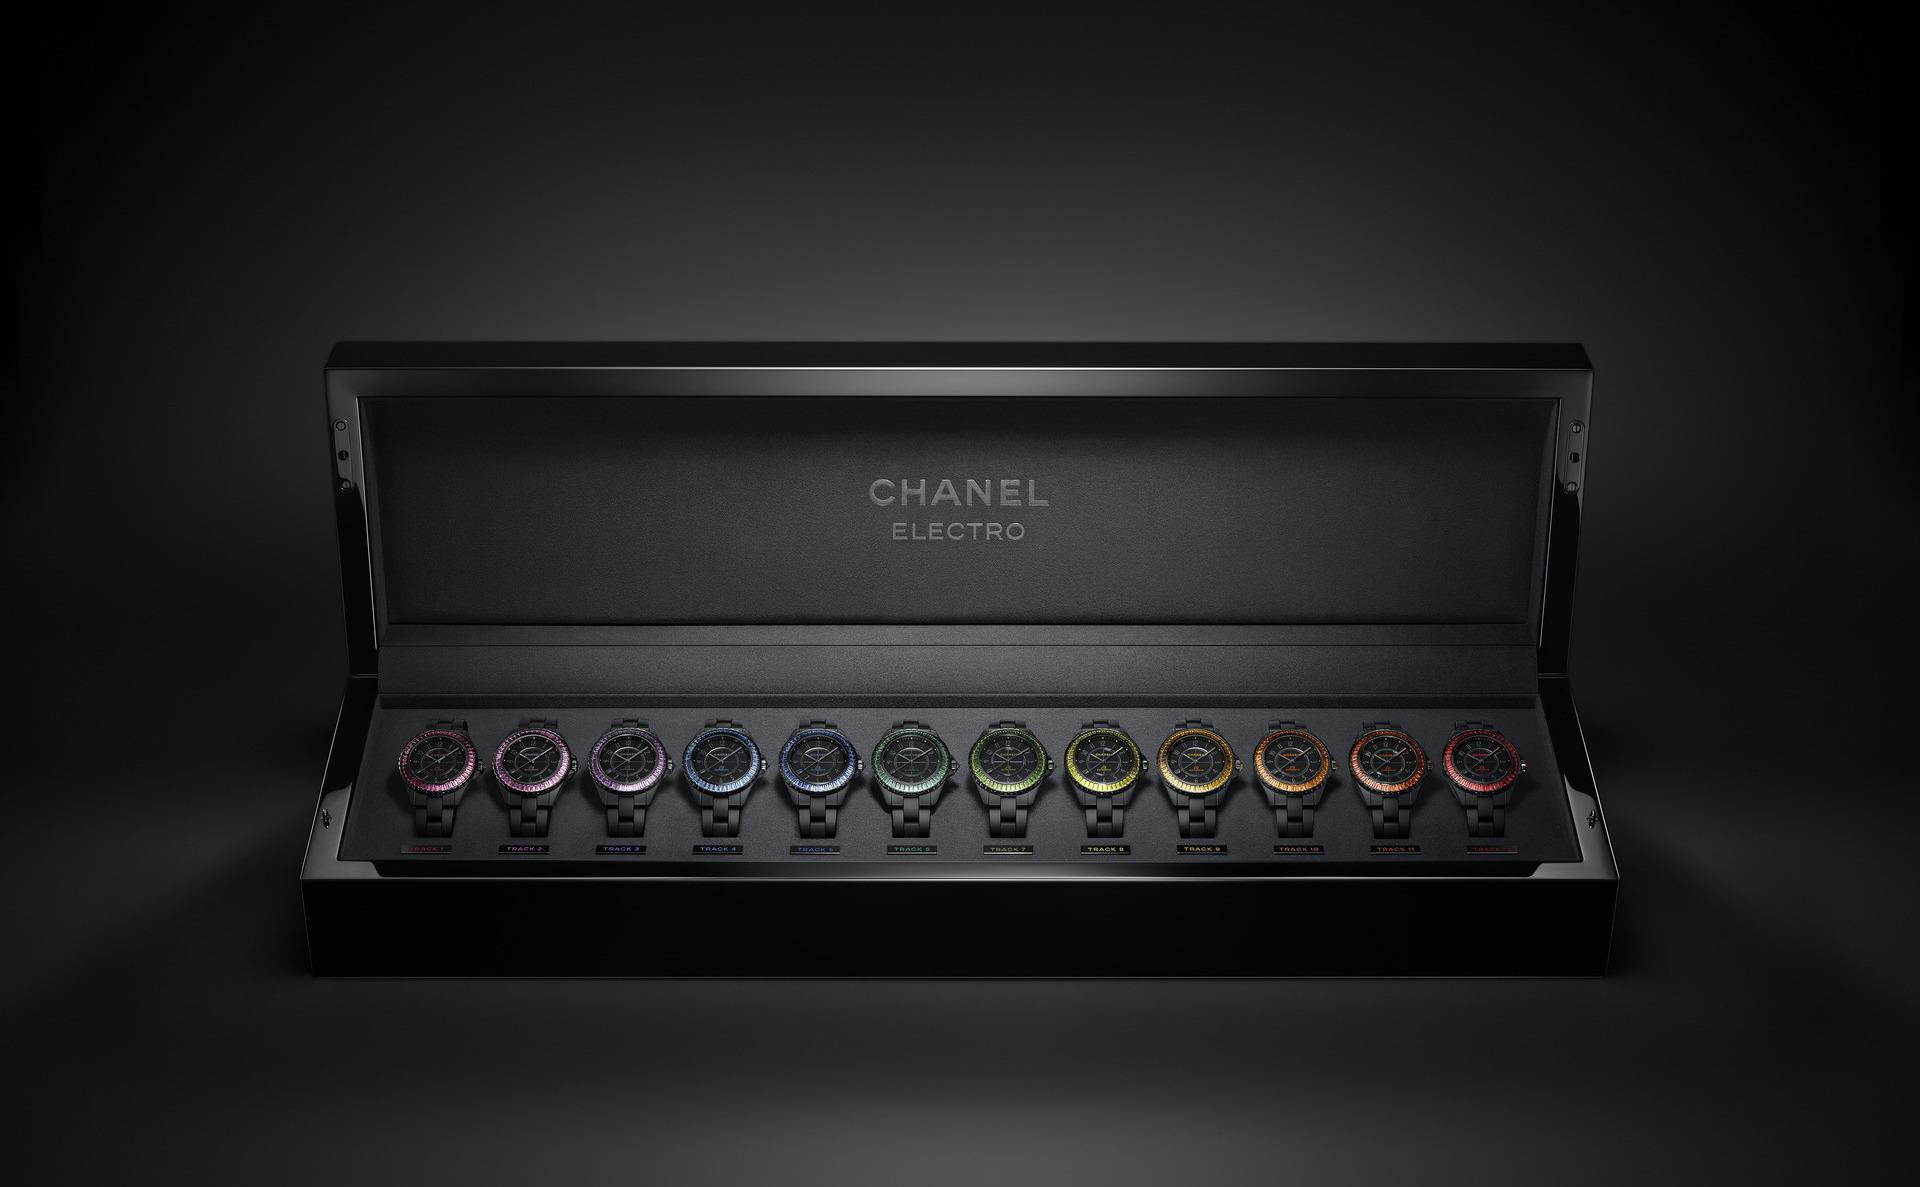 The Chanel J12 Electro will make you grateful for French watchmaking